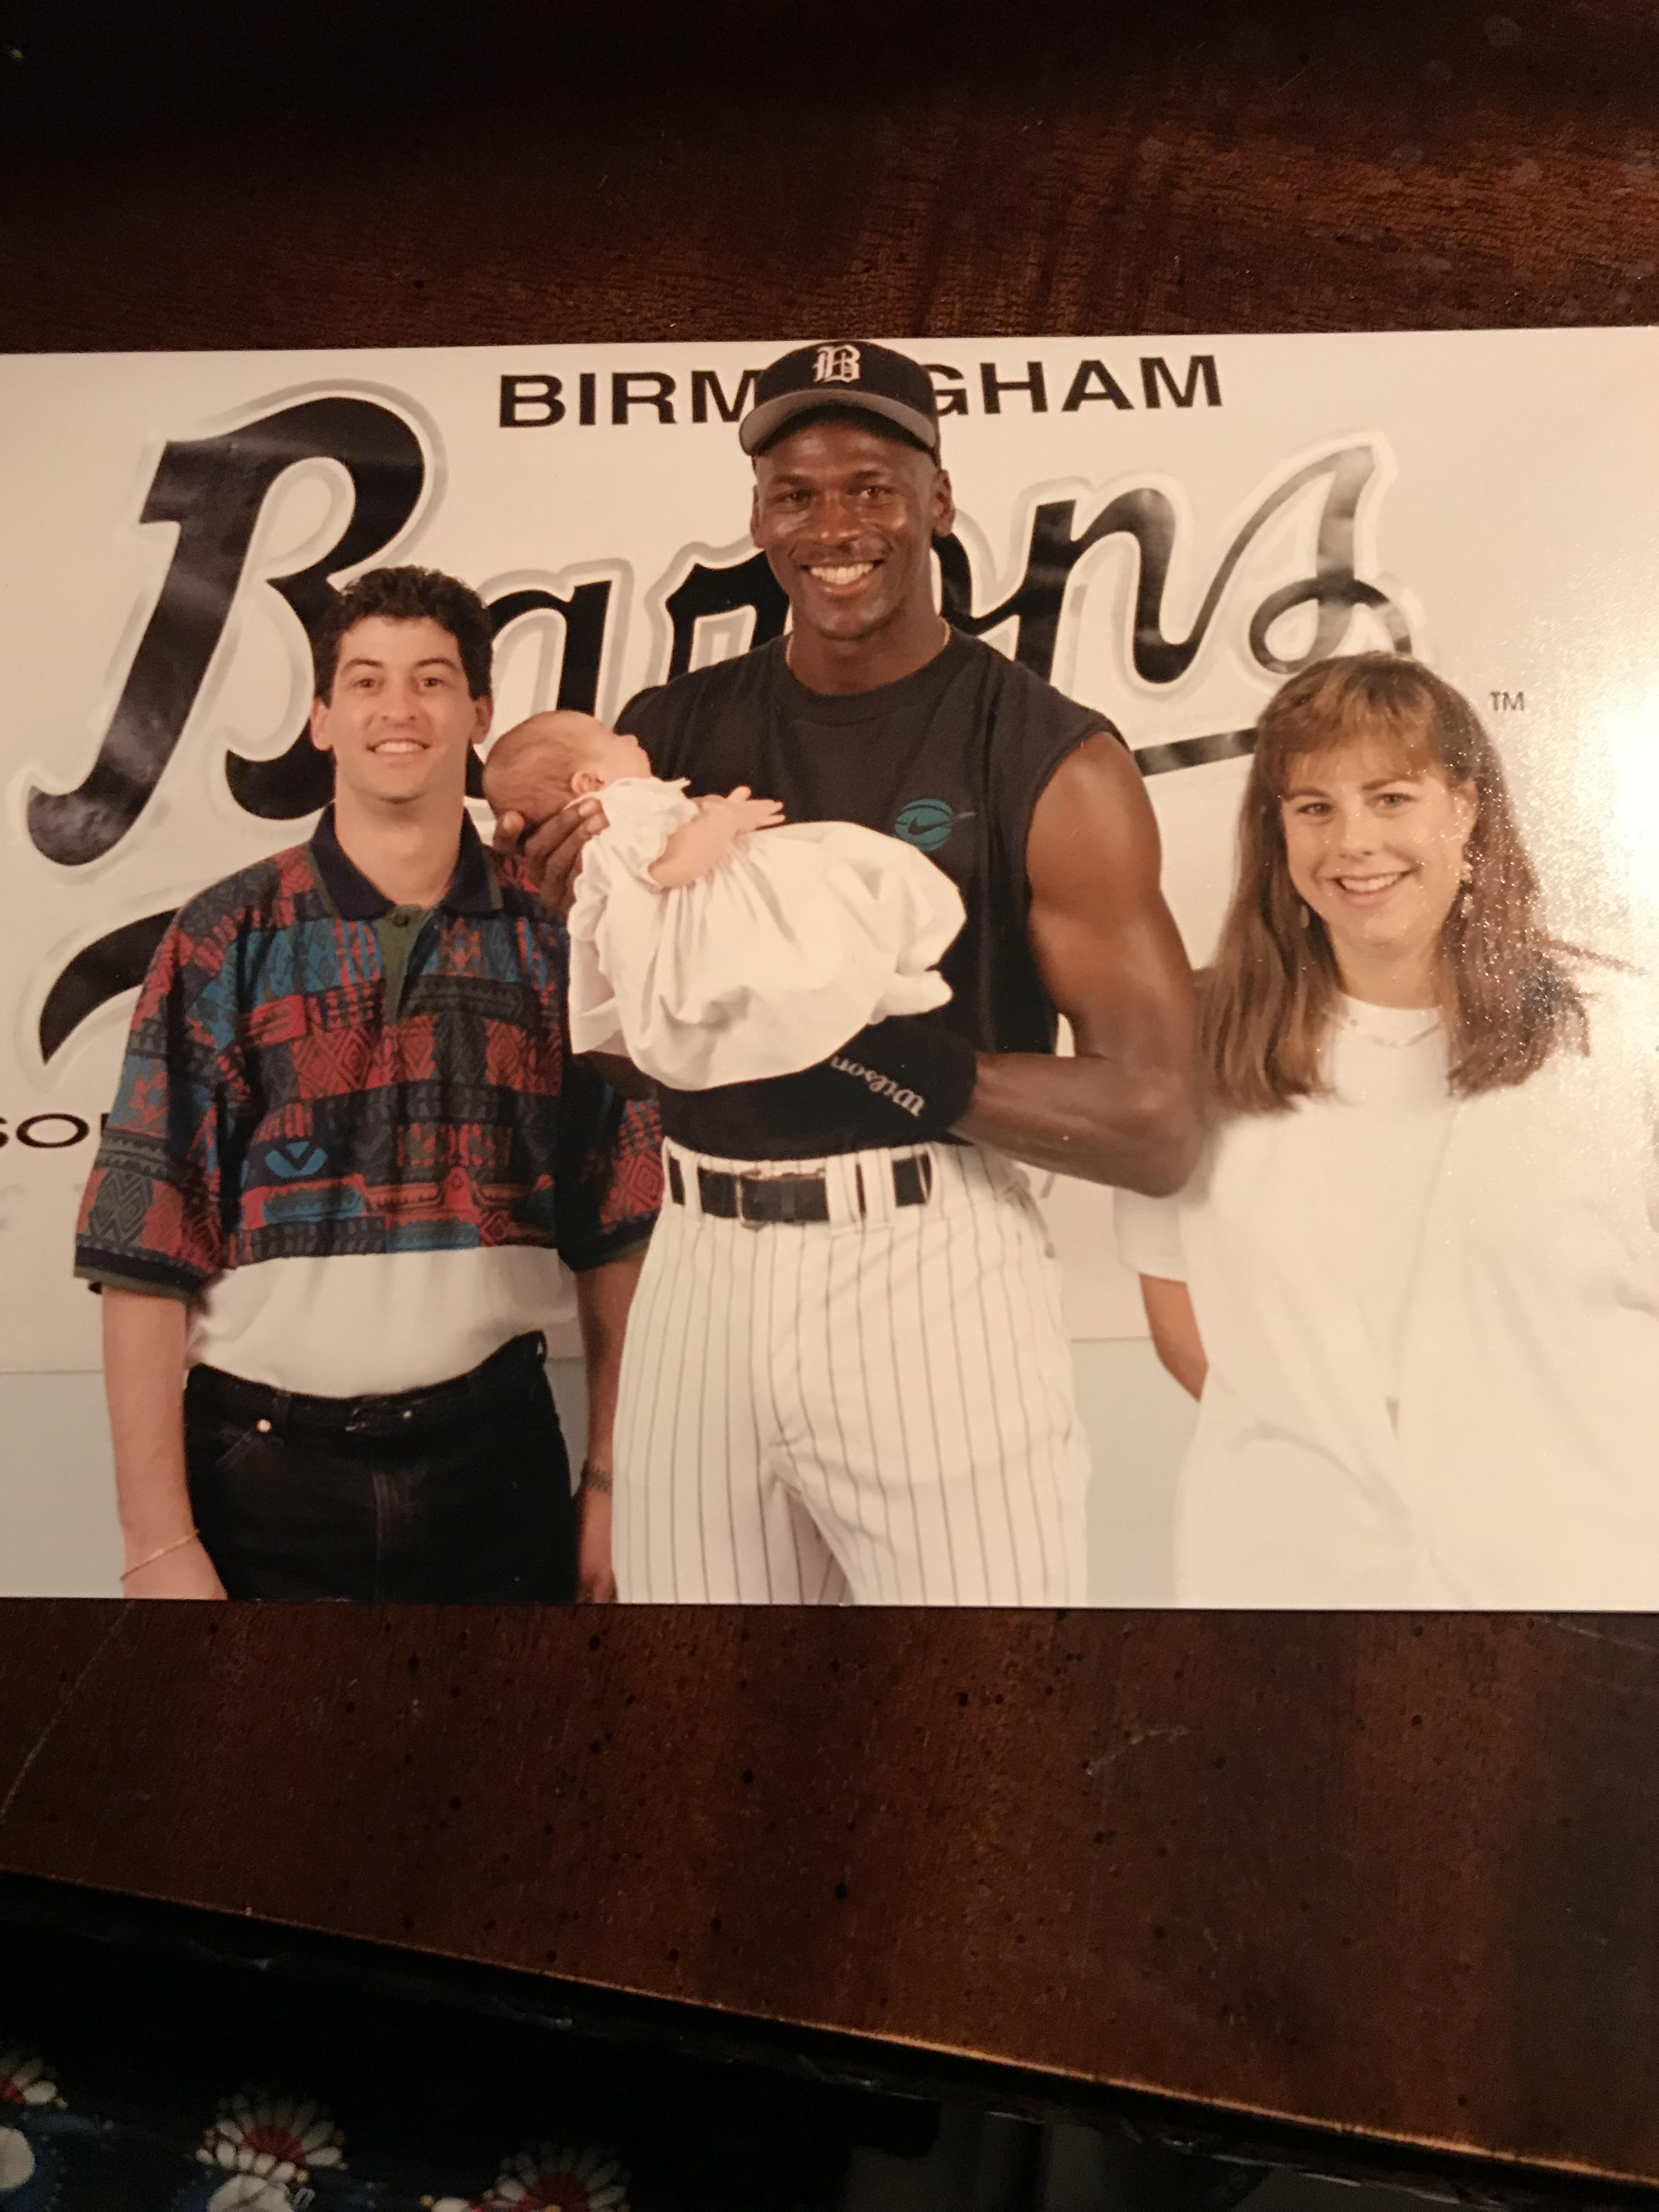 Michael Jordan's first game as a Birmingham Baron, a memory forever  cherished